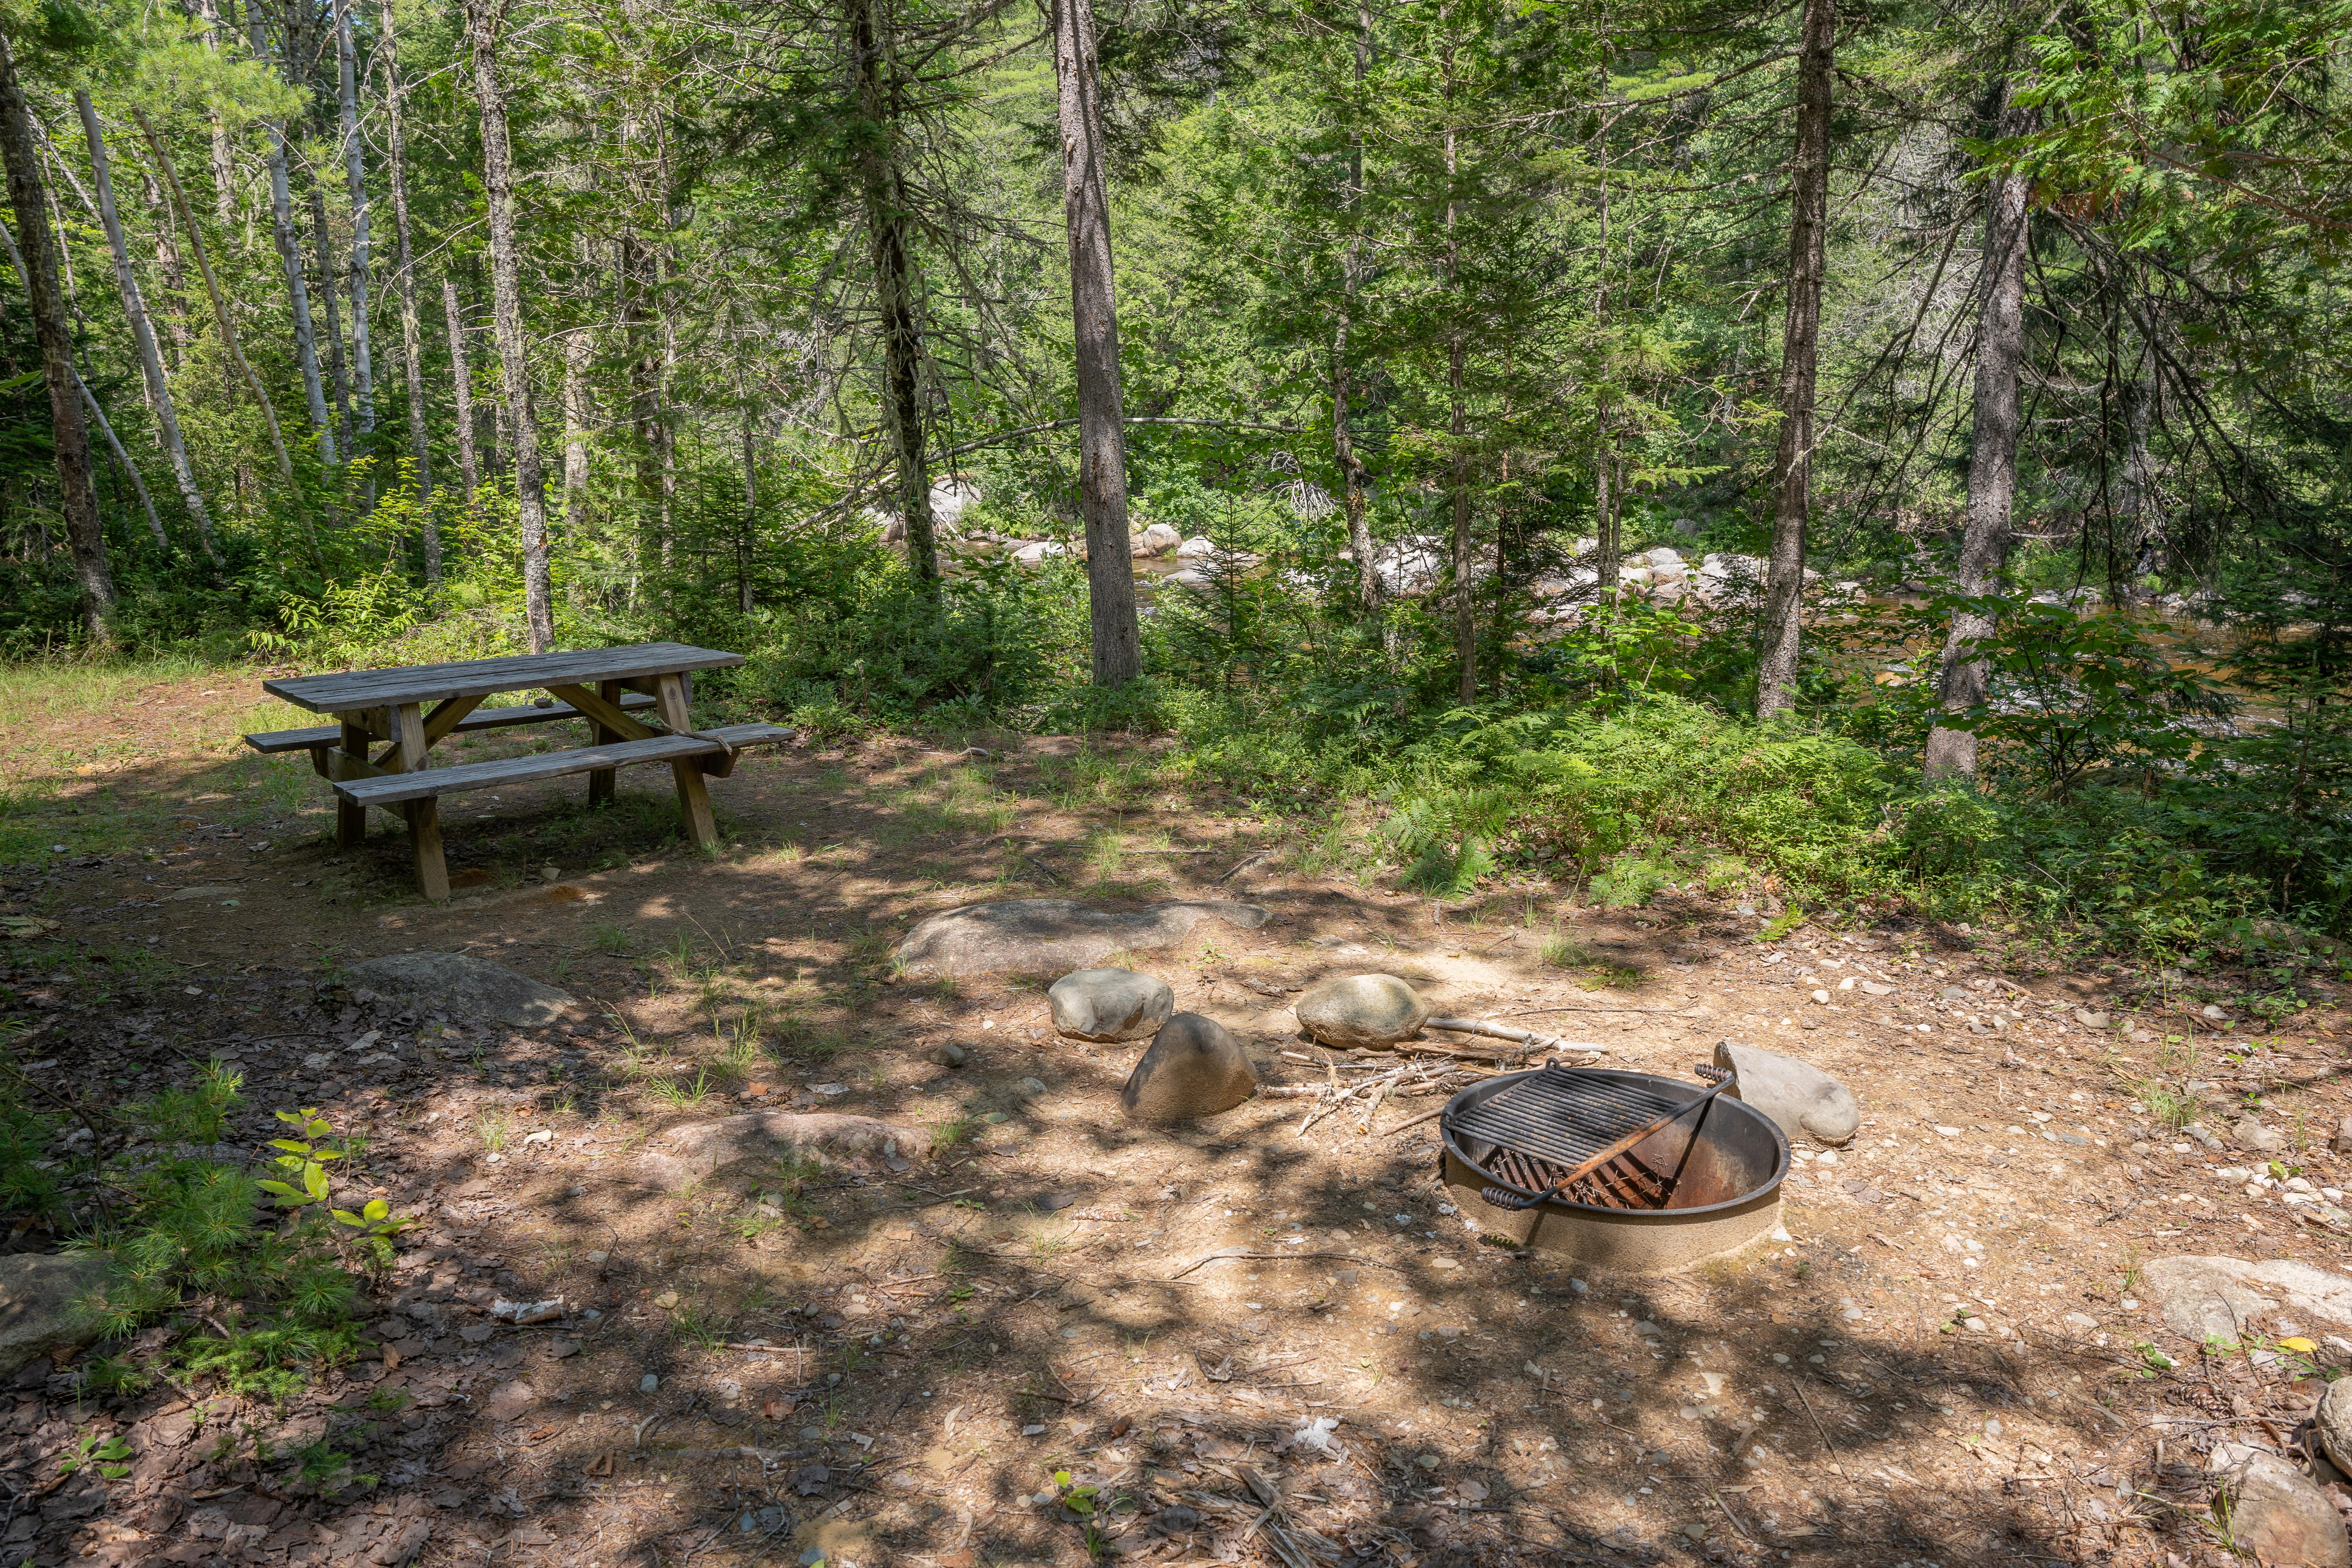 A picnic table, fire ring, and clearing for a tent on the bank of Wassataquoik Stream.